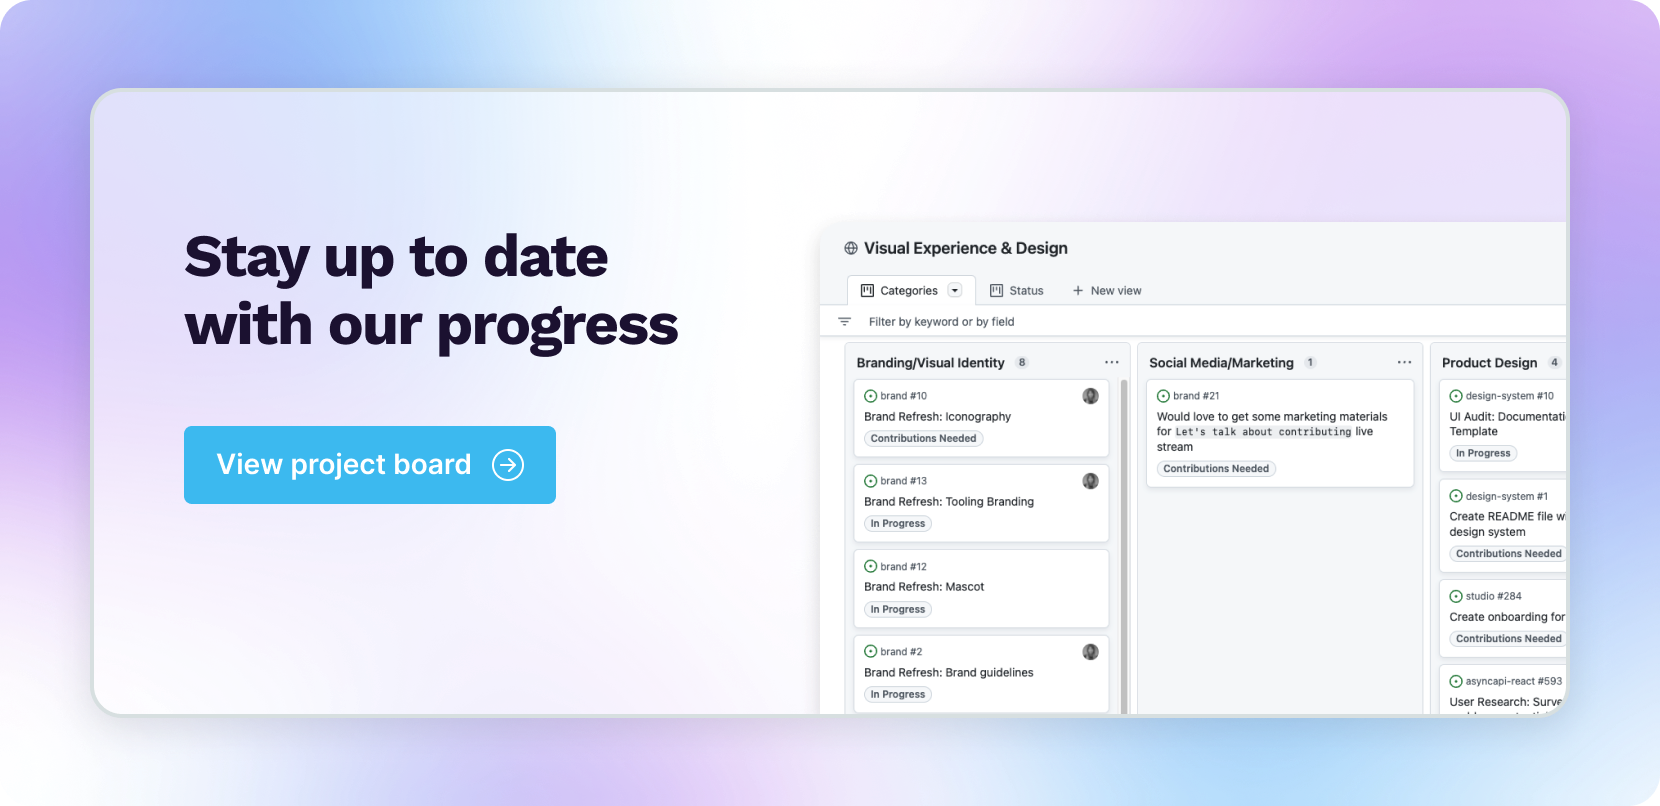 Stay up to date with our progress. View project board ->